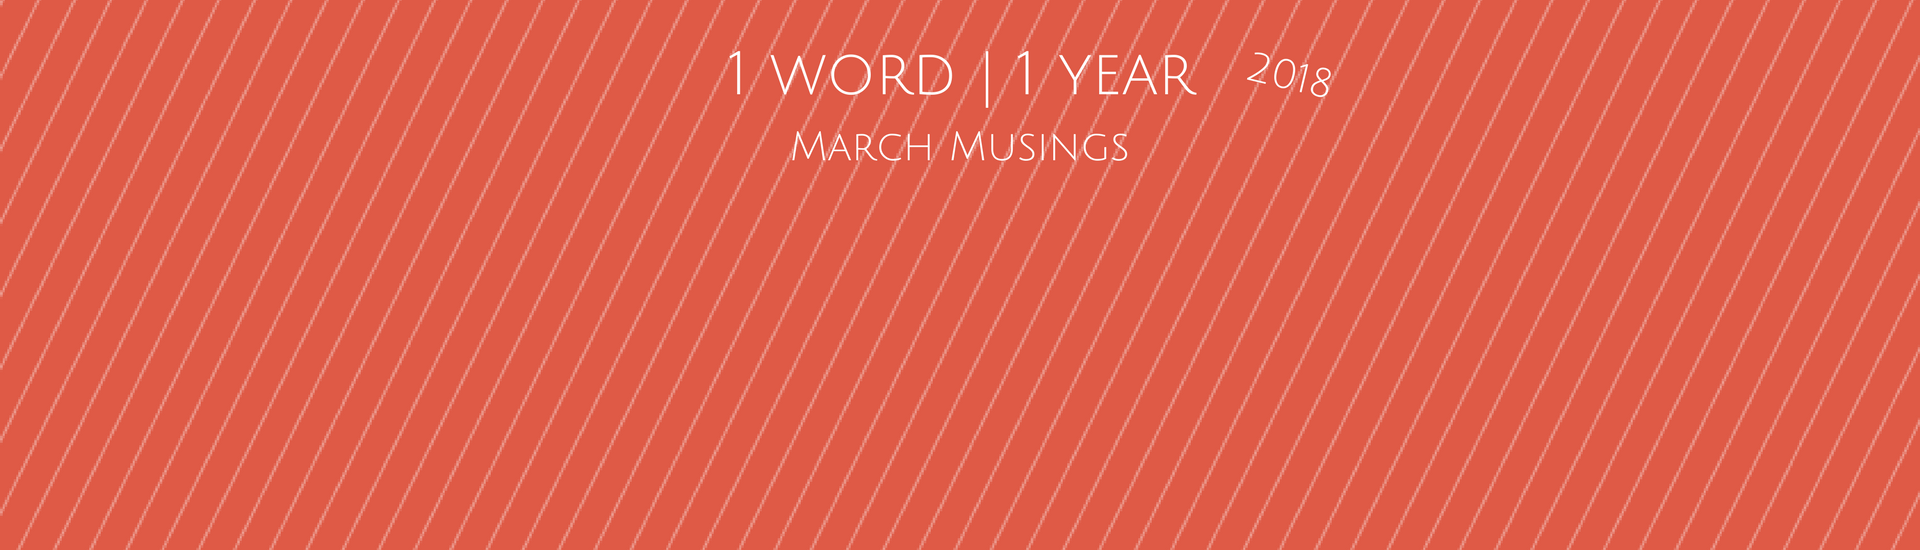 1 word for 1 year 2018. March musings with four grace quotes